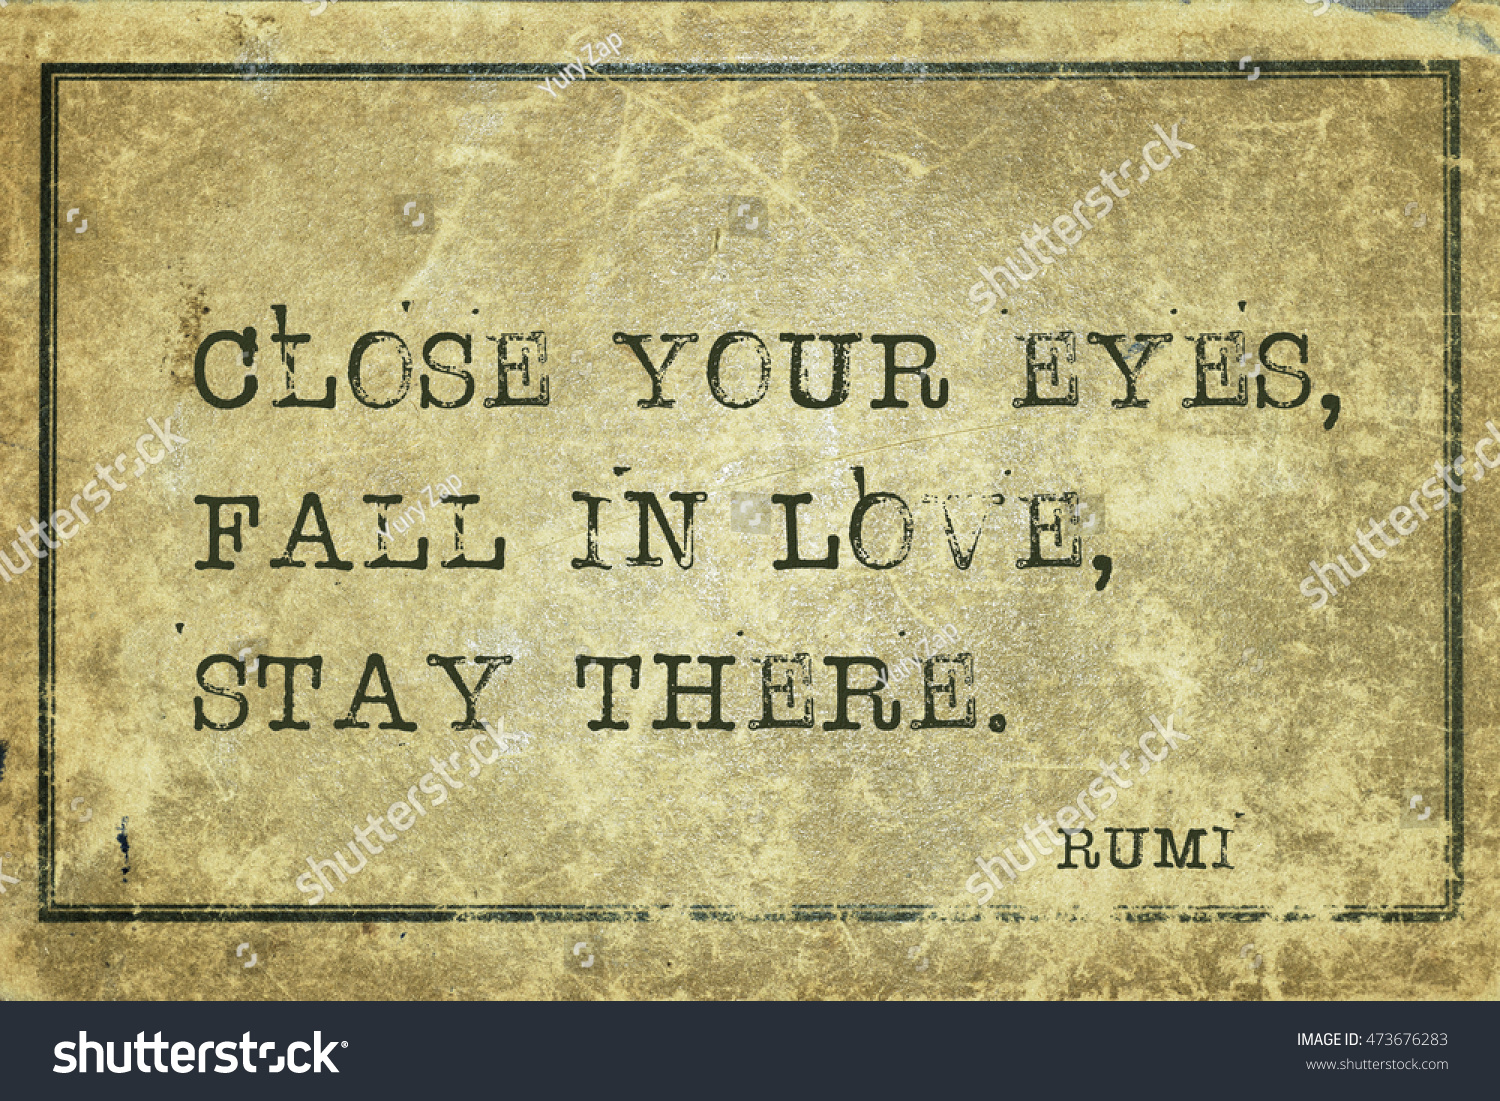 Close your eyes fall in Love stay there ancient Persian poet and philosopher